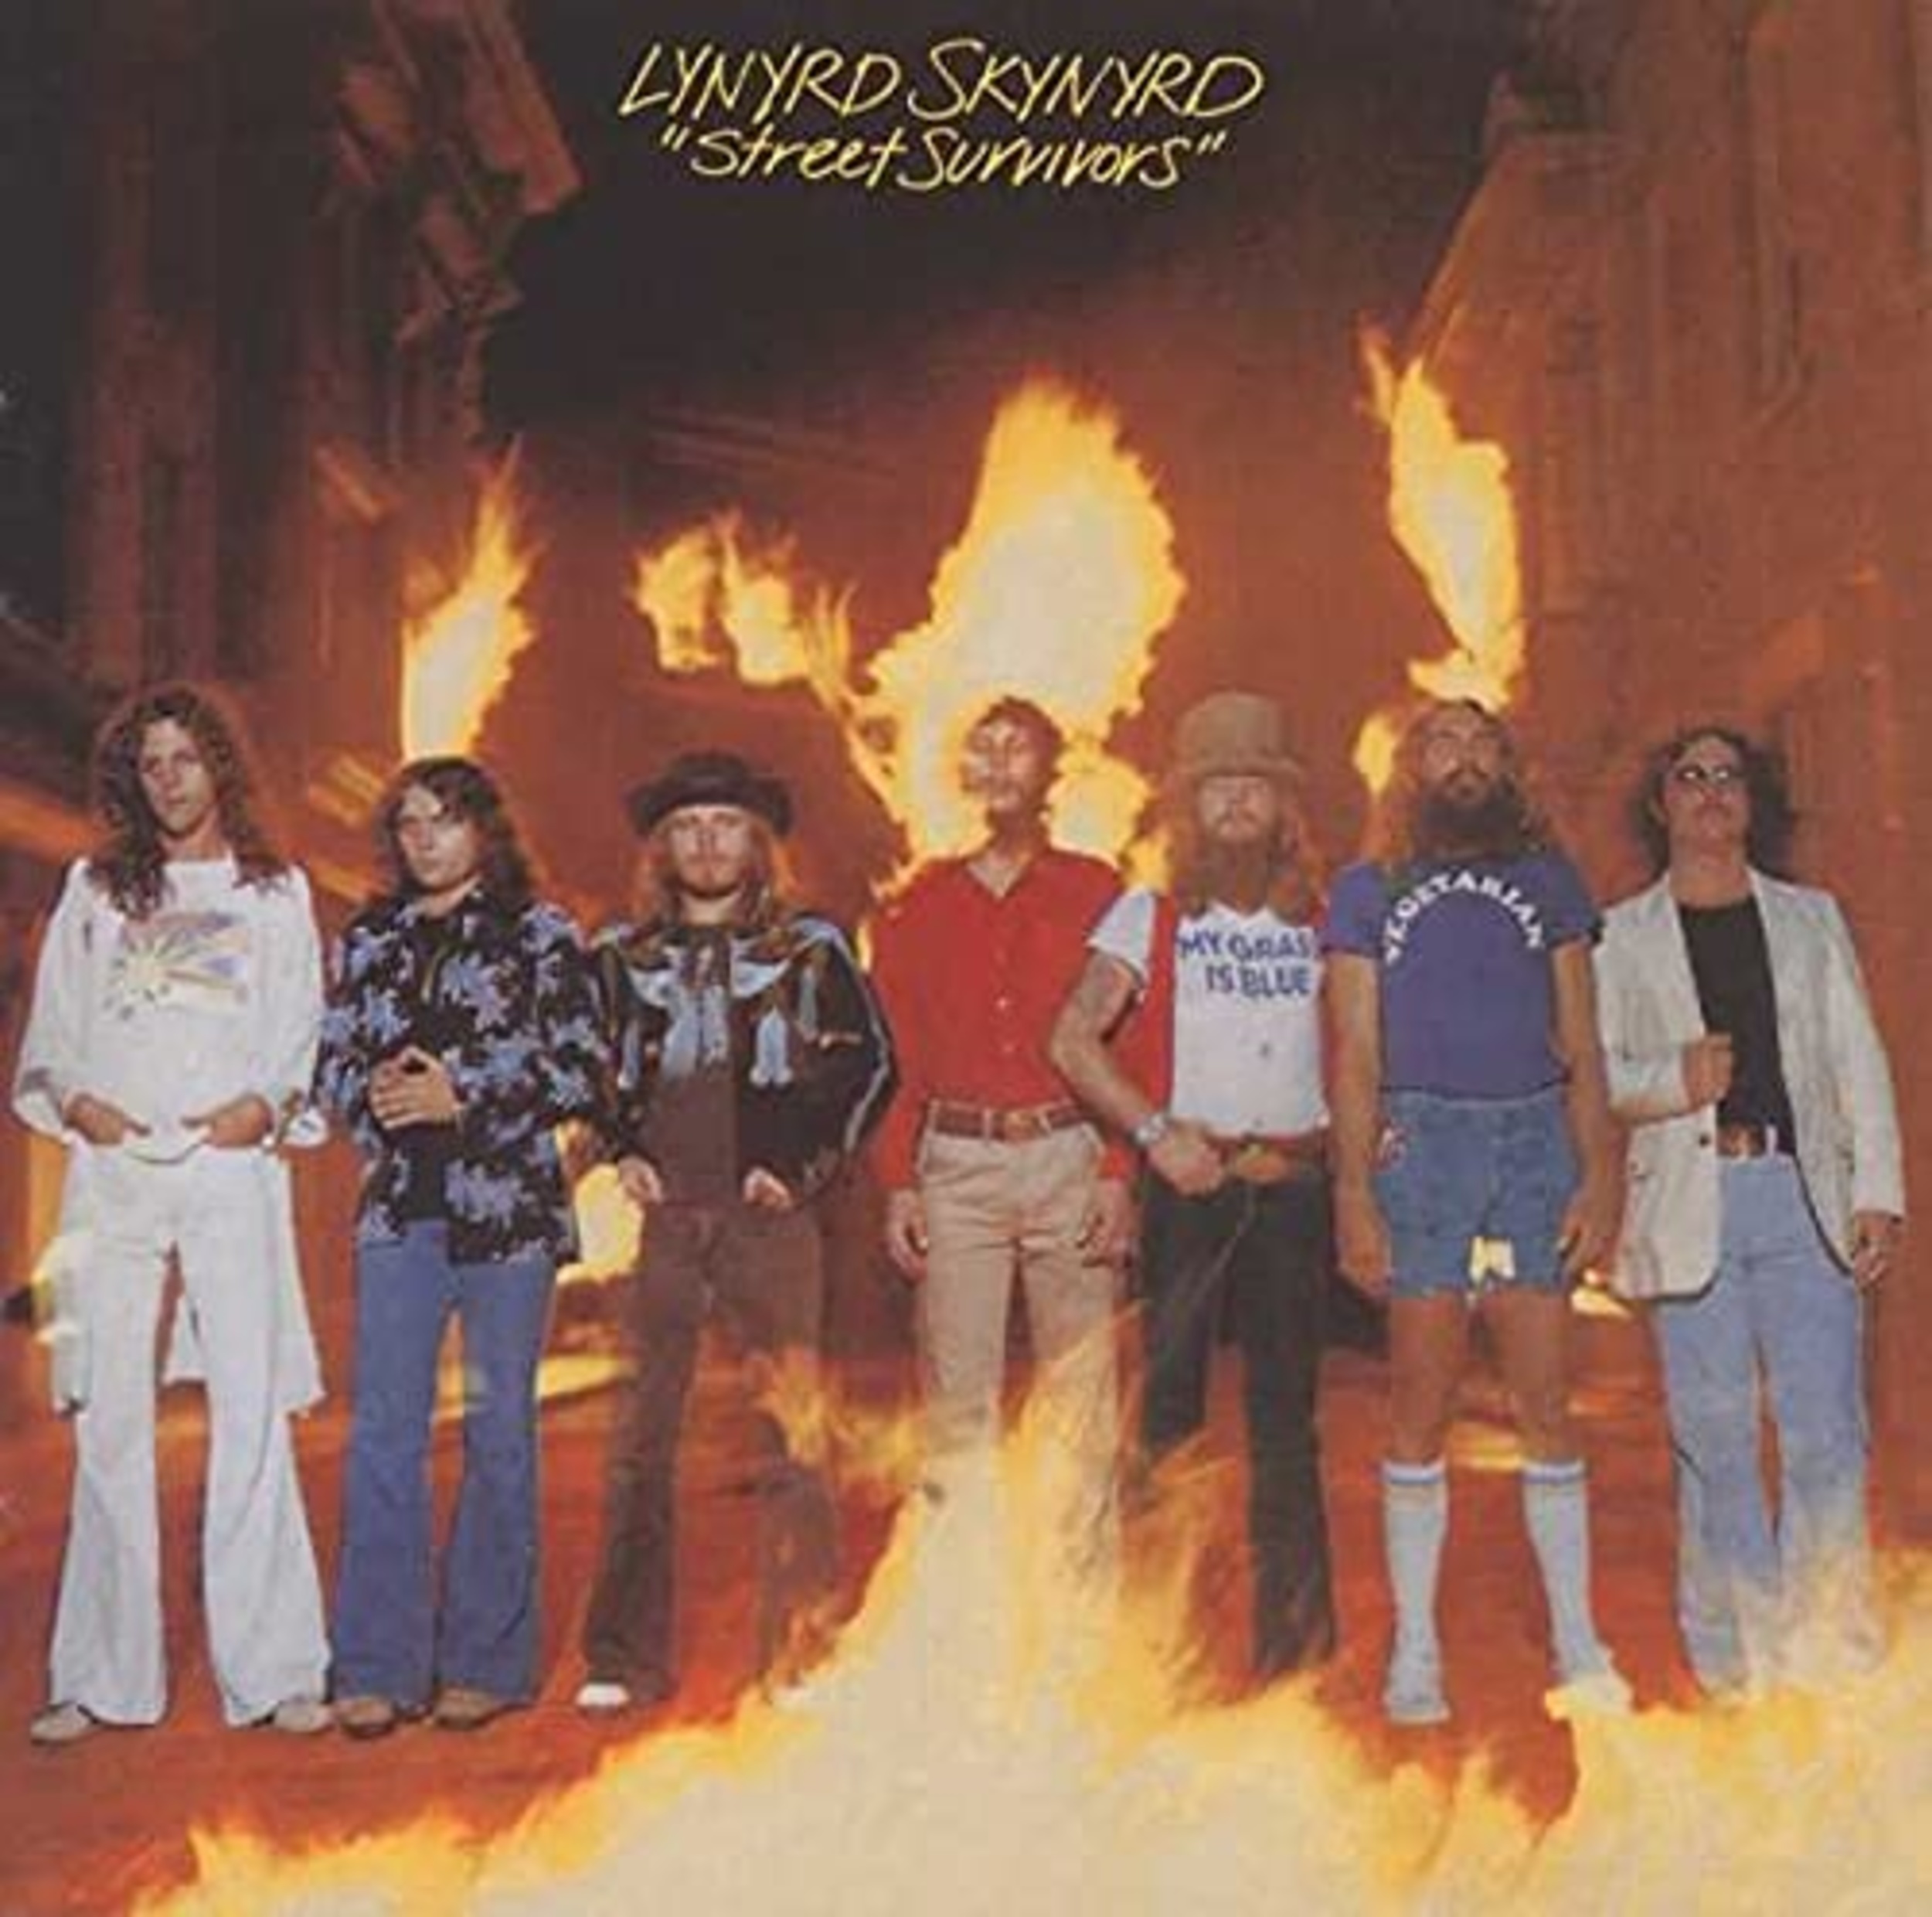 <p>One of the band's most popular tunes, but "That Smell" is also quite eerie considering the legacy of the <em>Street </em><em>Survivors </em>album that it called home. The song chronicles the band's increased issues with alcohol and harder drugs, like cocaine and heroin. It particularly highlights guitarist Gary Rossington's car accident following a night of alcohol and drug abuse — serving a warning to the band that "<a href="https://en.wikipedia.org/wiki/That_Smell">tomorrow might not be here for you</a>" and "the smell of death surrounds you."</p>